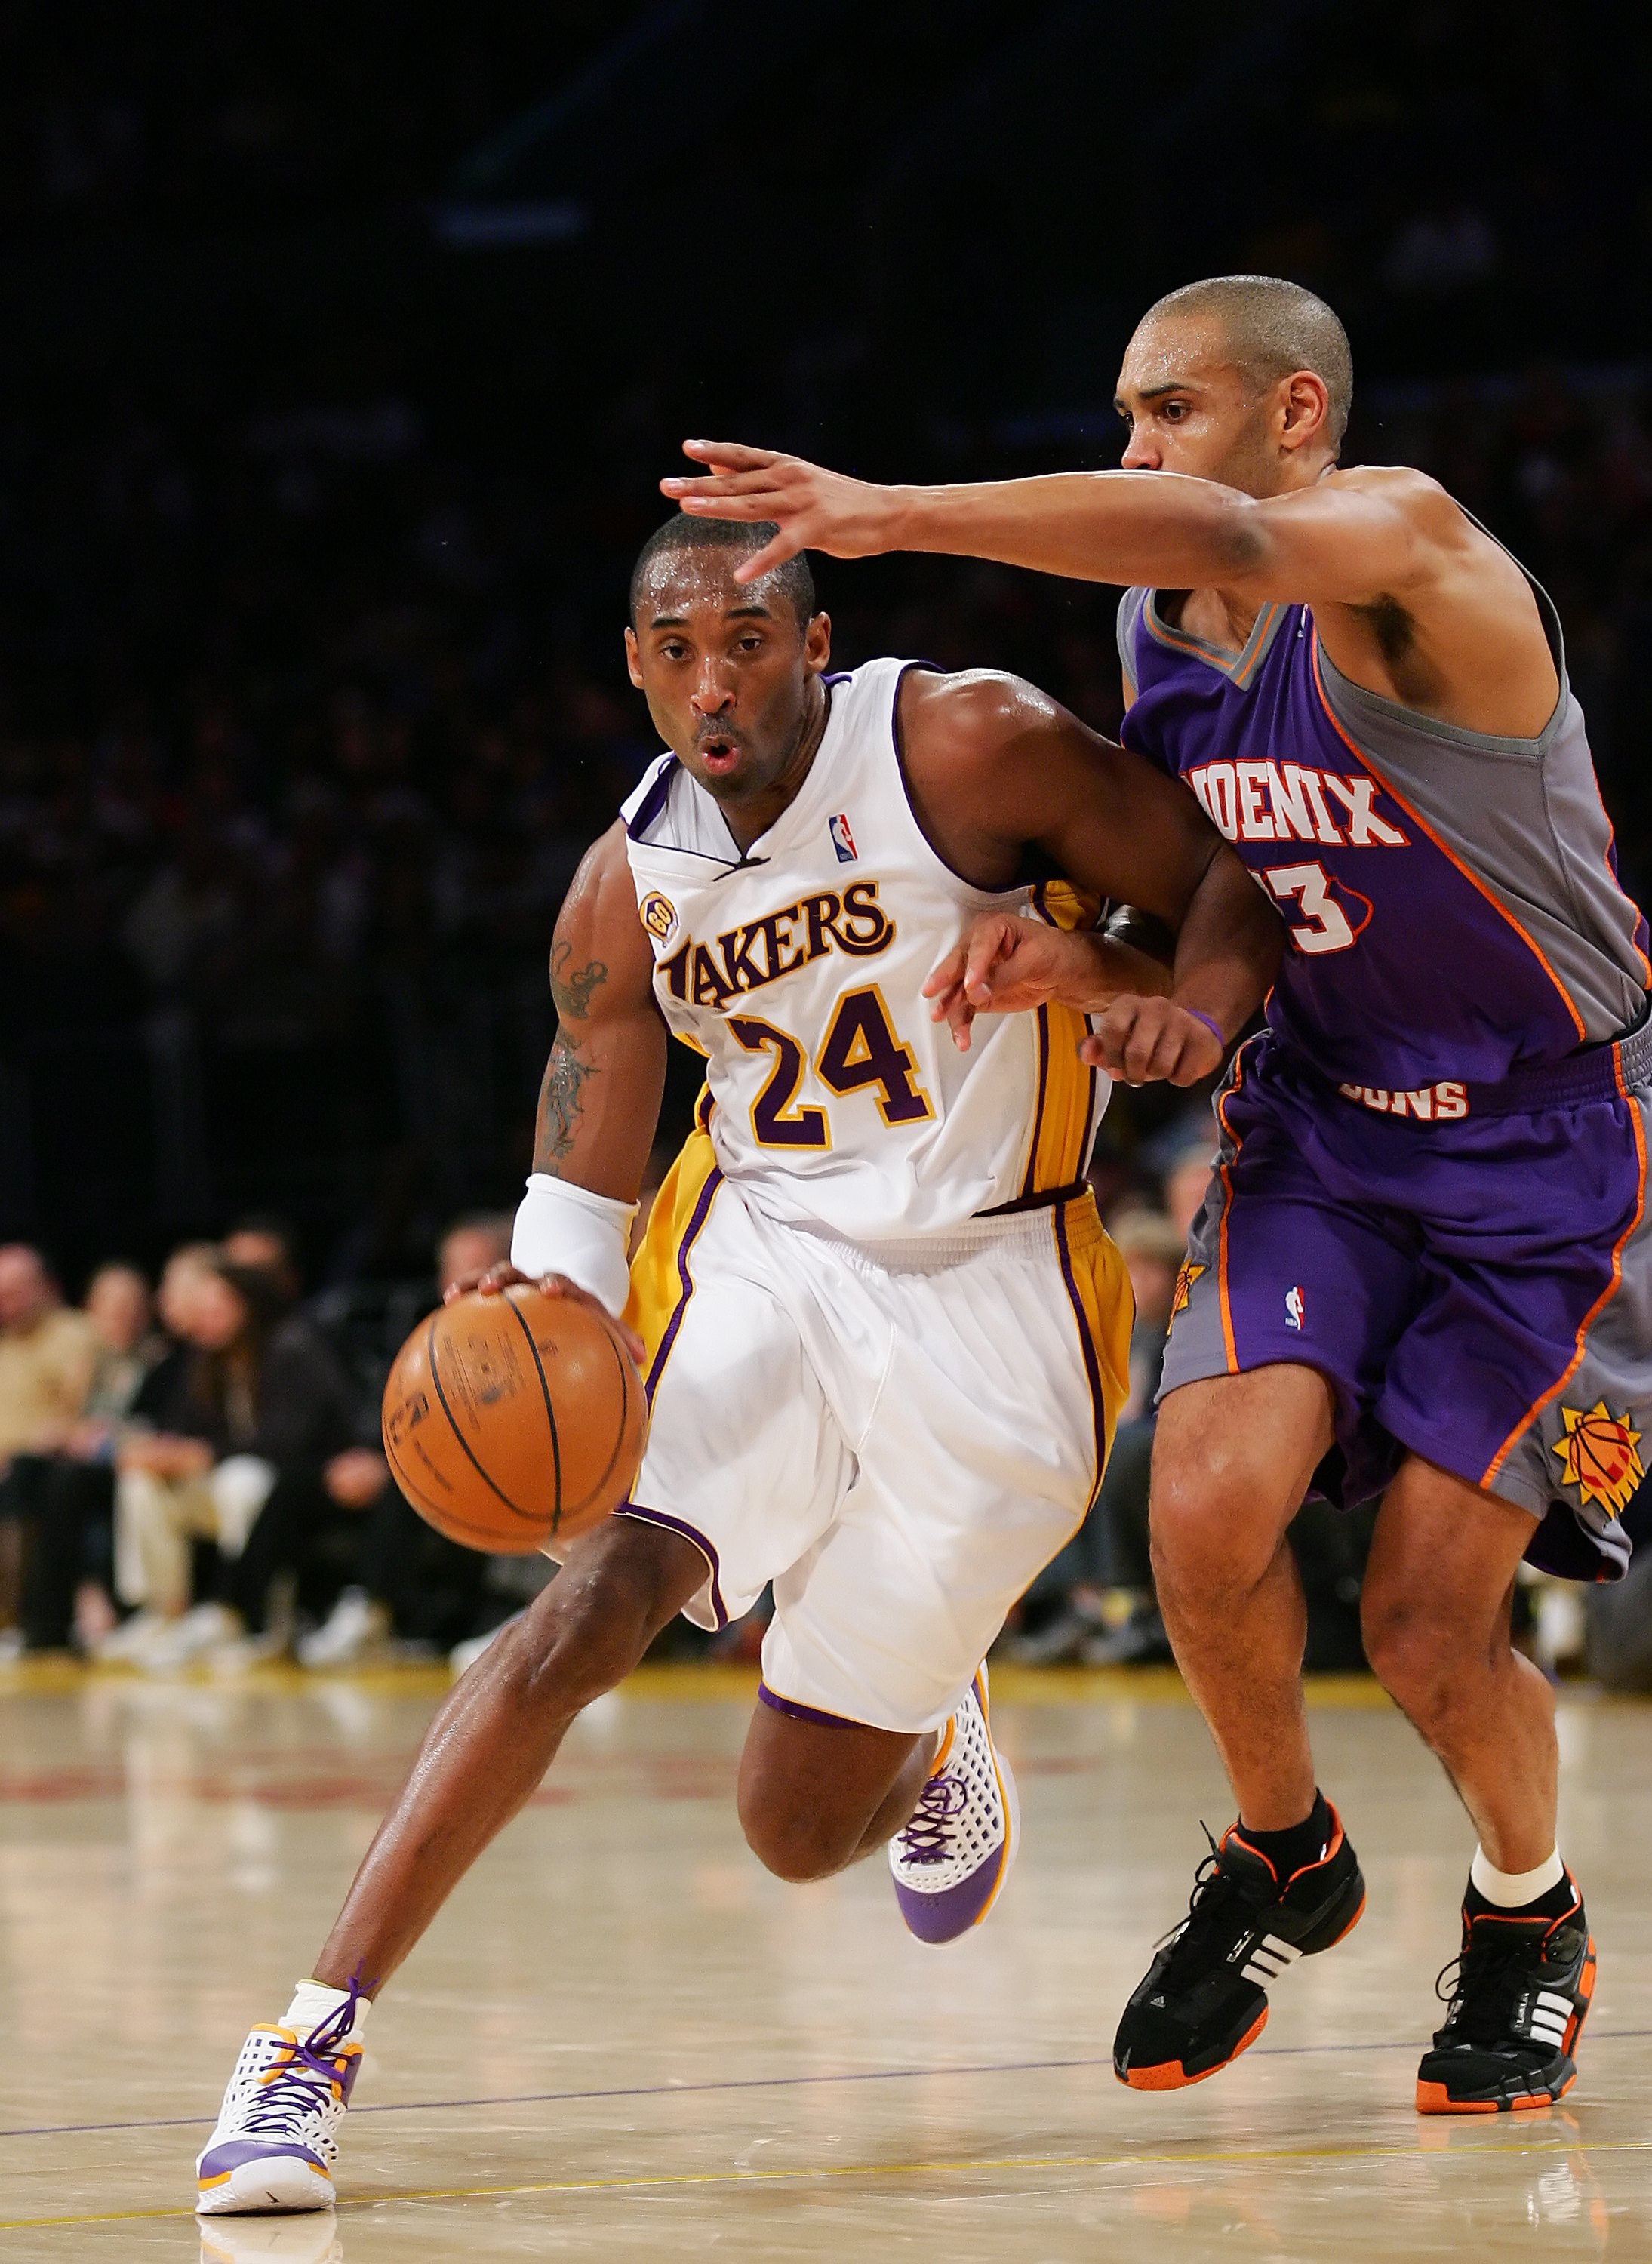 LOS ANGELES, CA - DECEMBER 25:   Kobe Bryant #24 of the Los Angeles Lakers drives against Grant Hill #33 of the Phoenix Suns at Staples Center on December 25, 2007 in Los Angeles, California.  NOTE TO USER: User expressly acknowledges and agrees that, by 